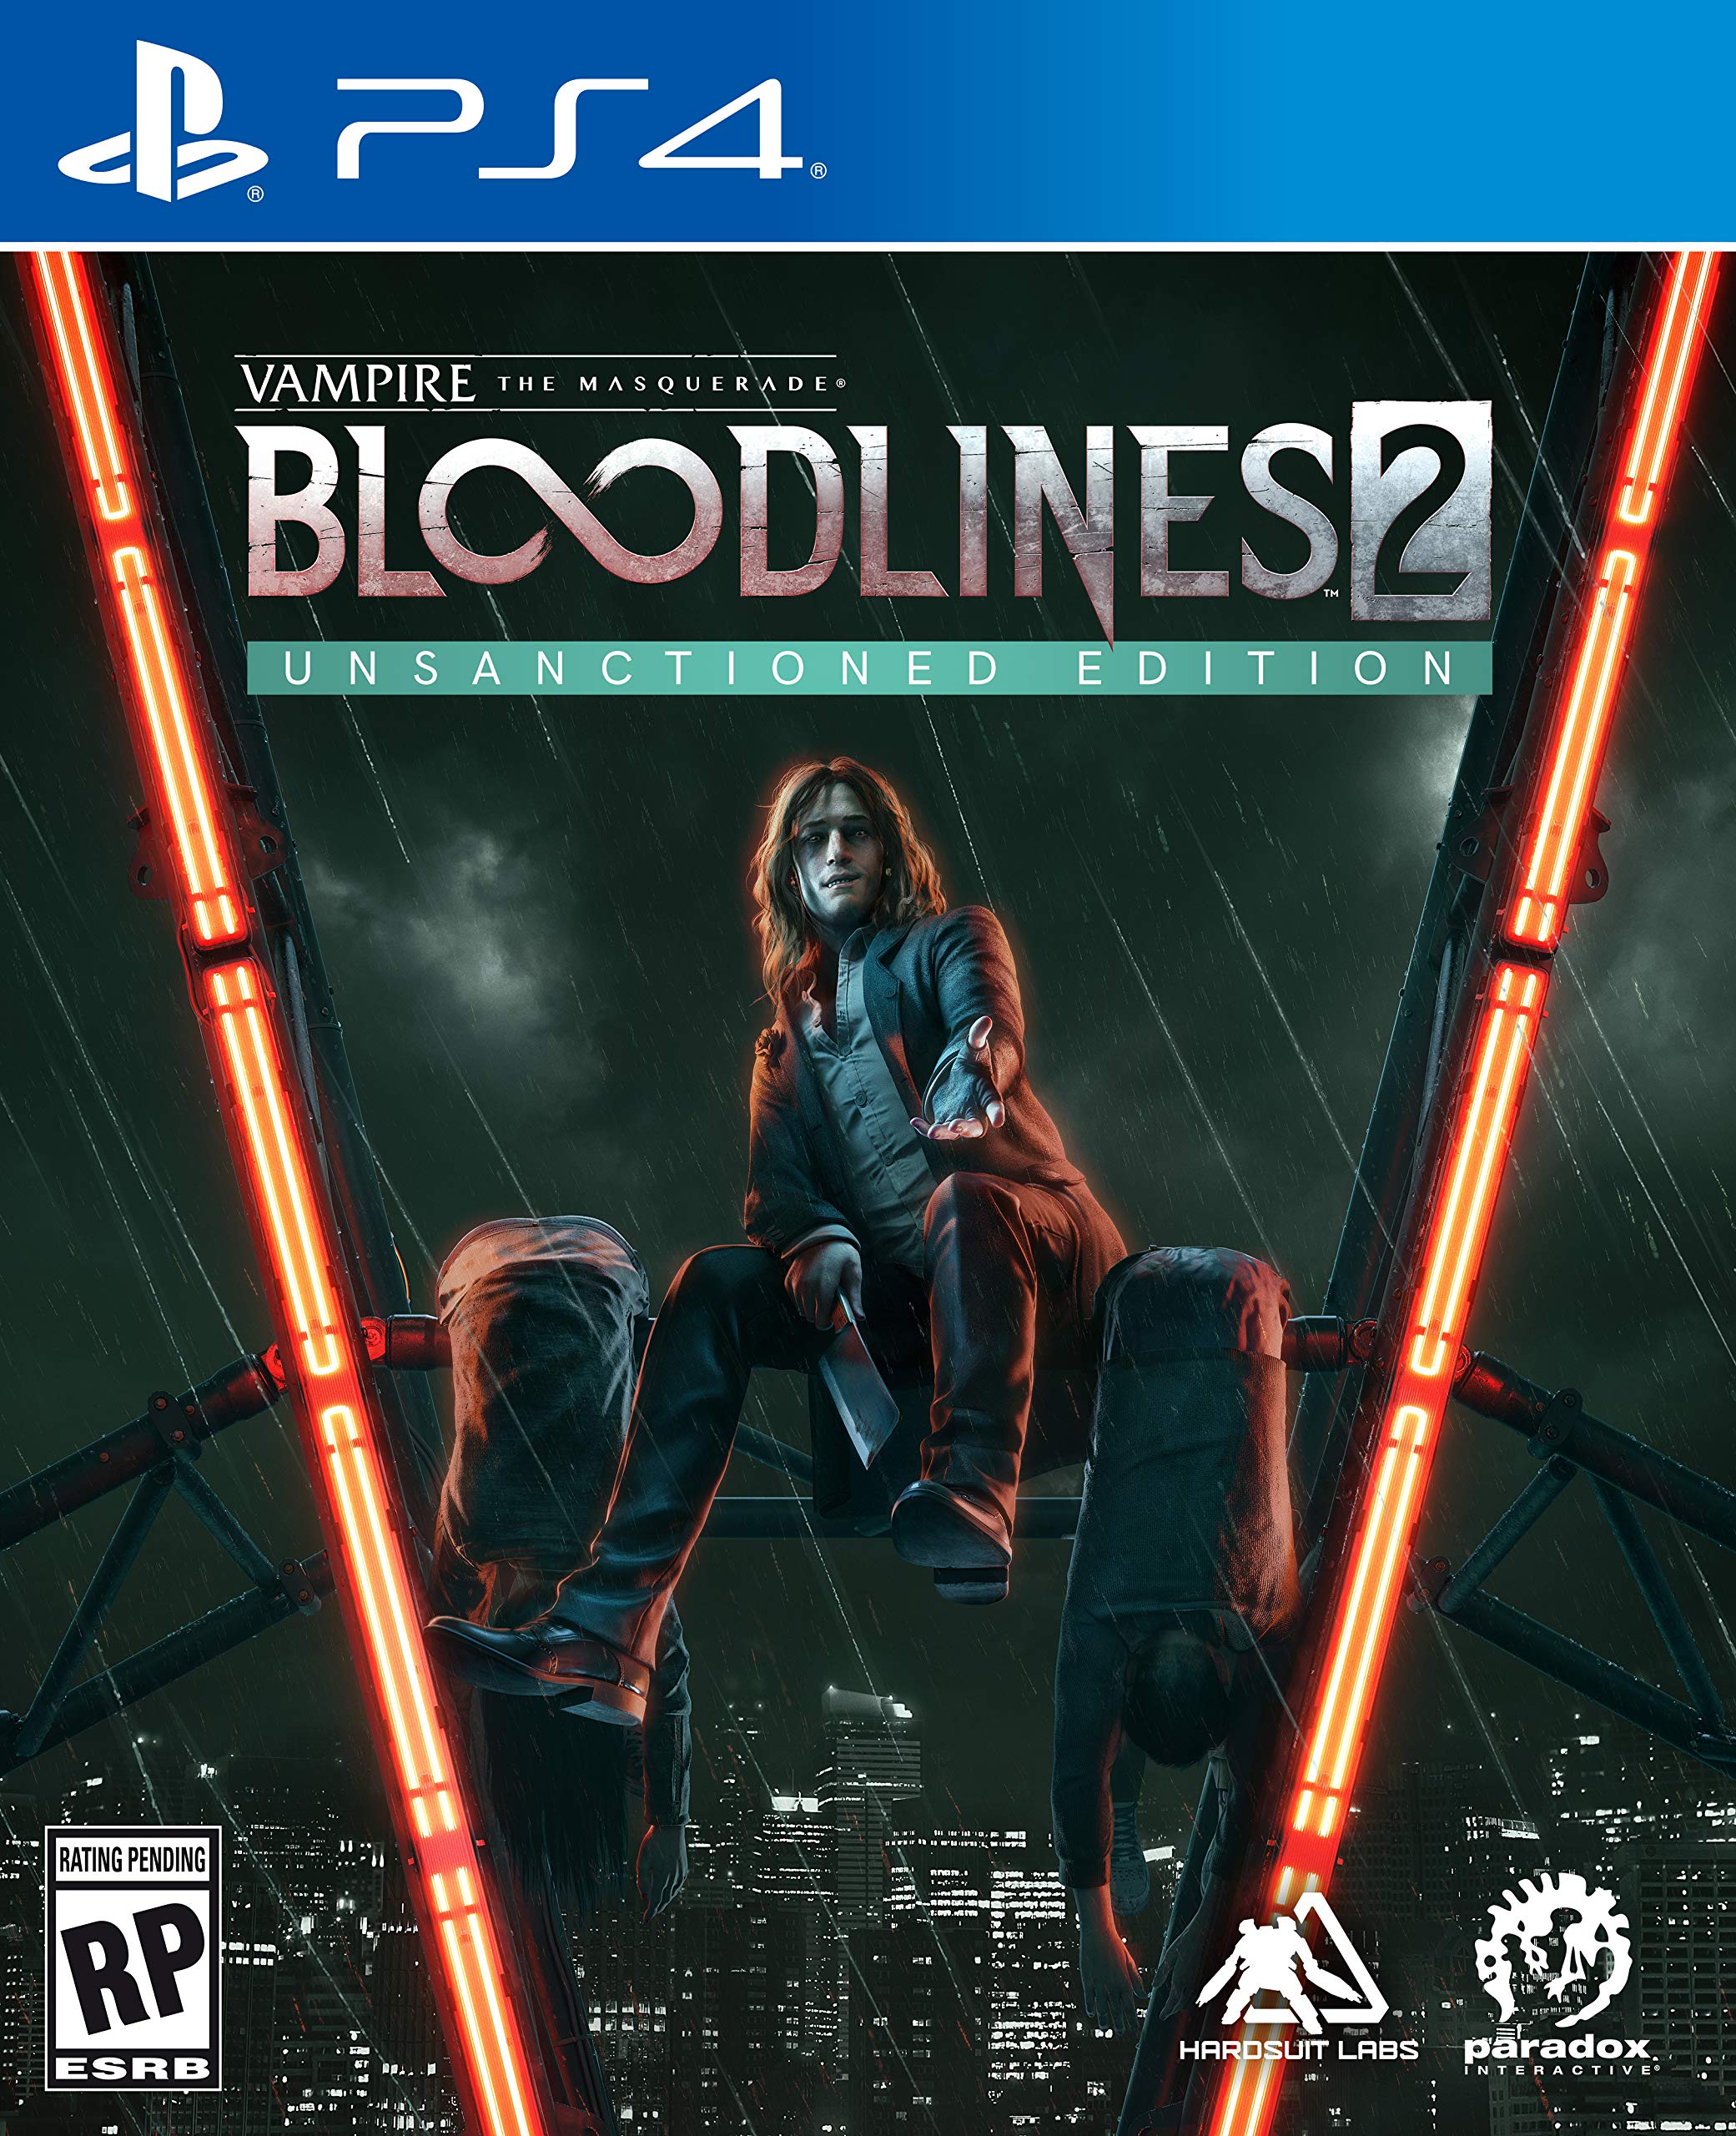 Vampire: The Masquerade - Bloodlines 2: Unsanctioned Edition - PlayStation 4 Unsanctioned Edition